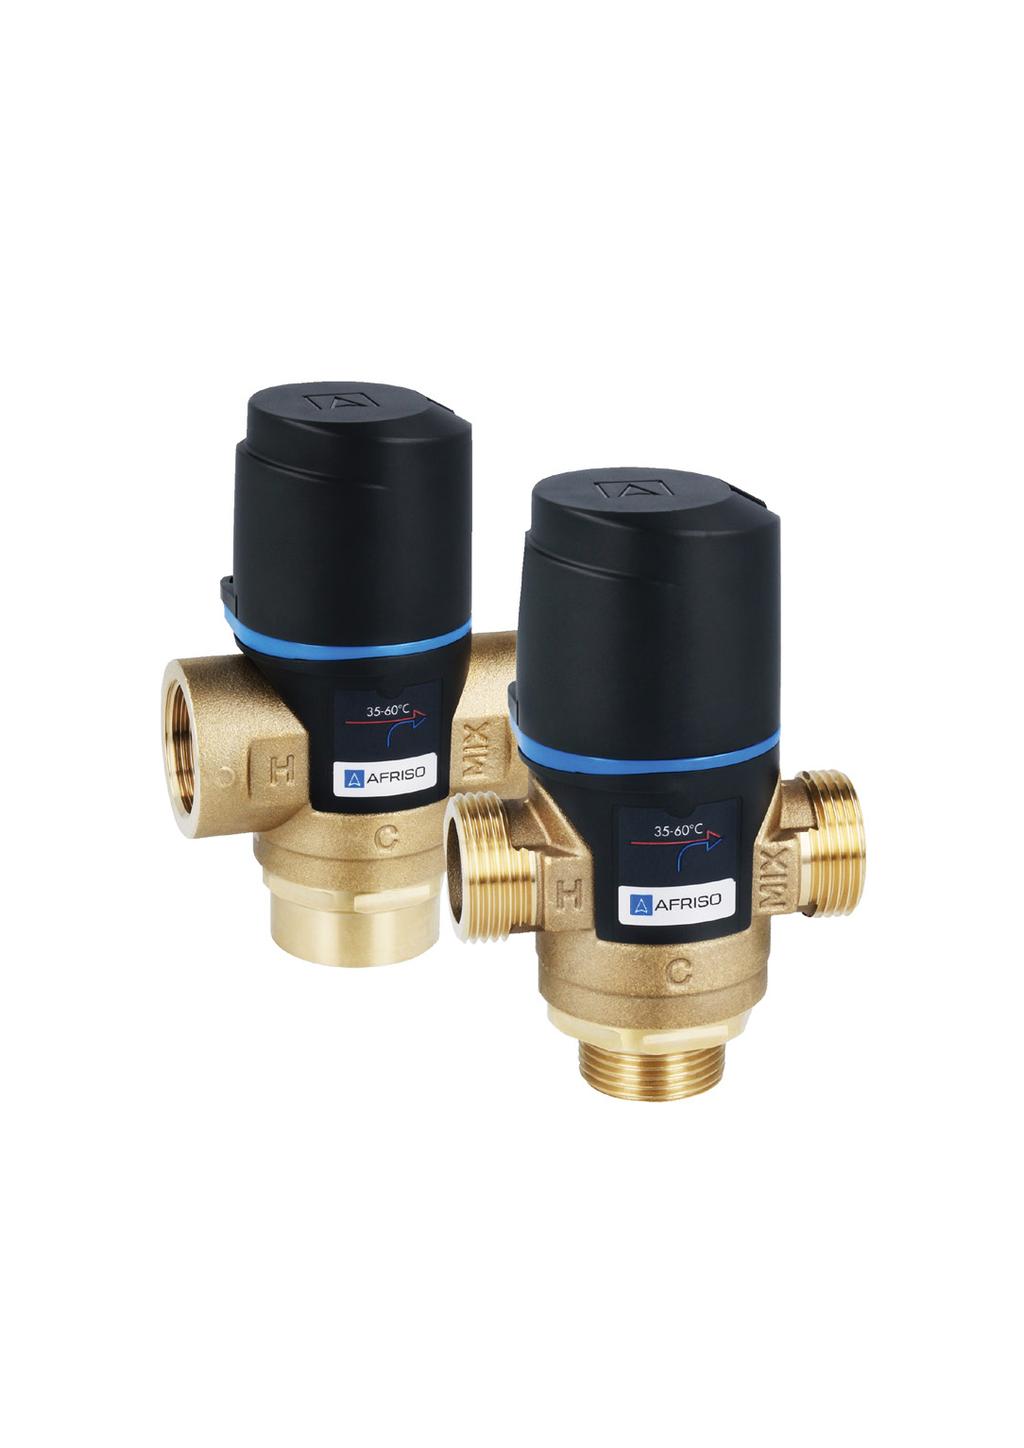 ProControl overview 20 Double scale Thermostatic mixing valves ATM The double legible scale